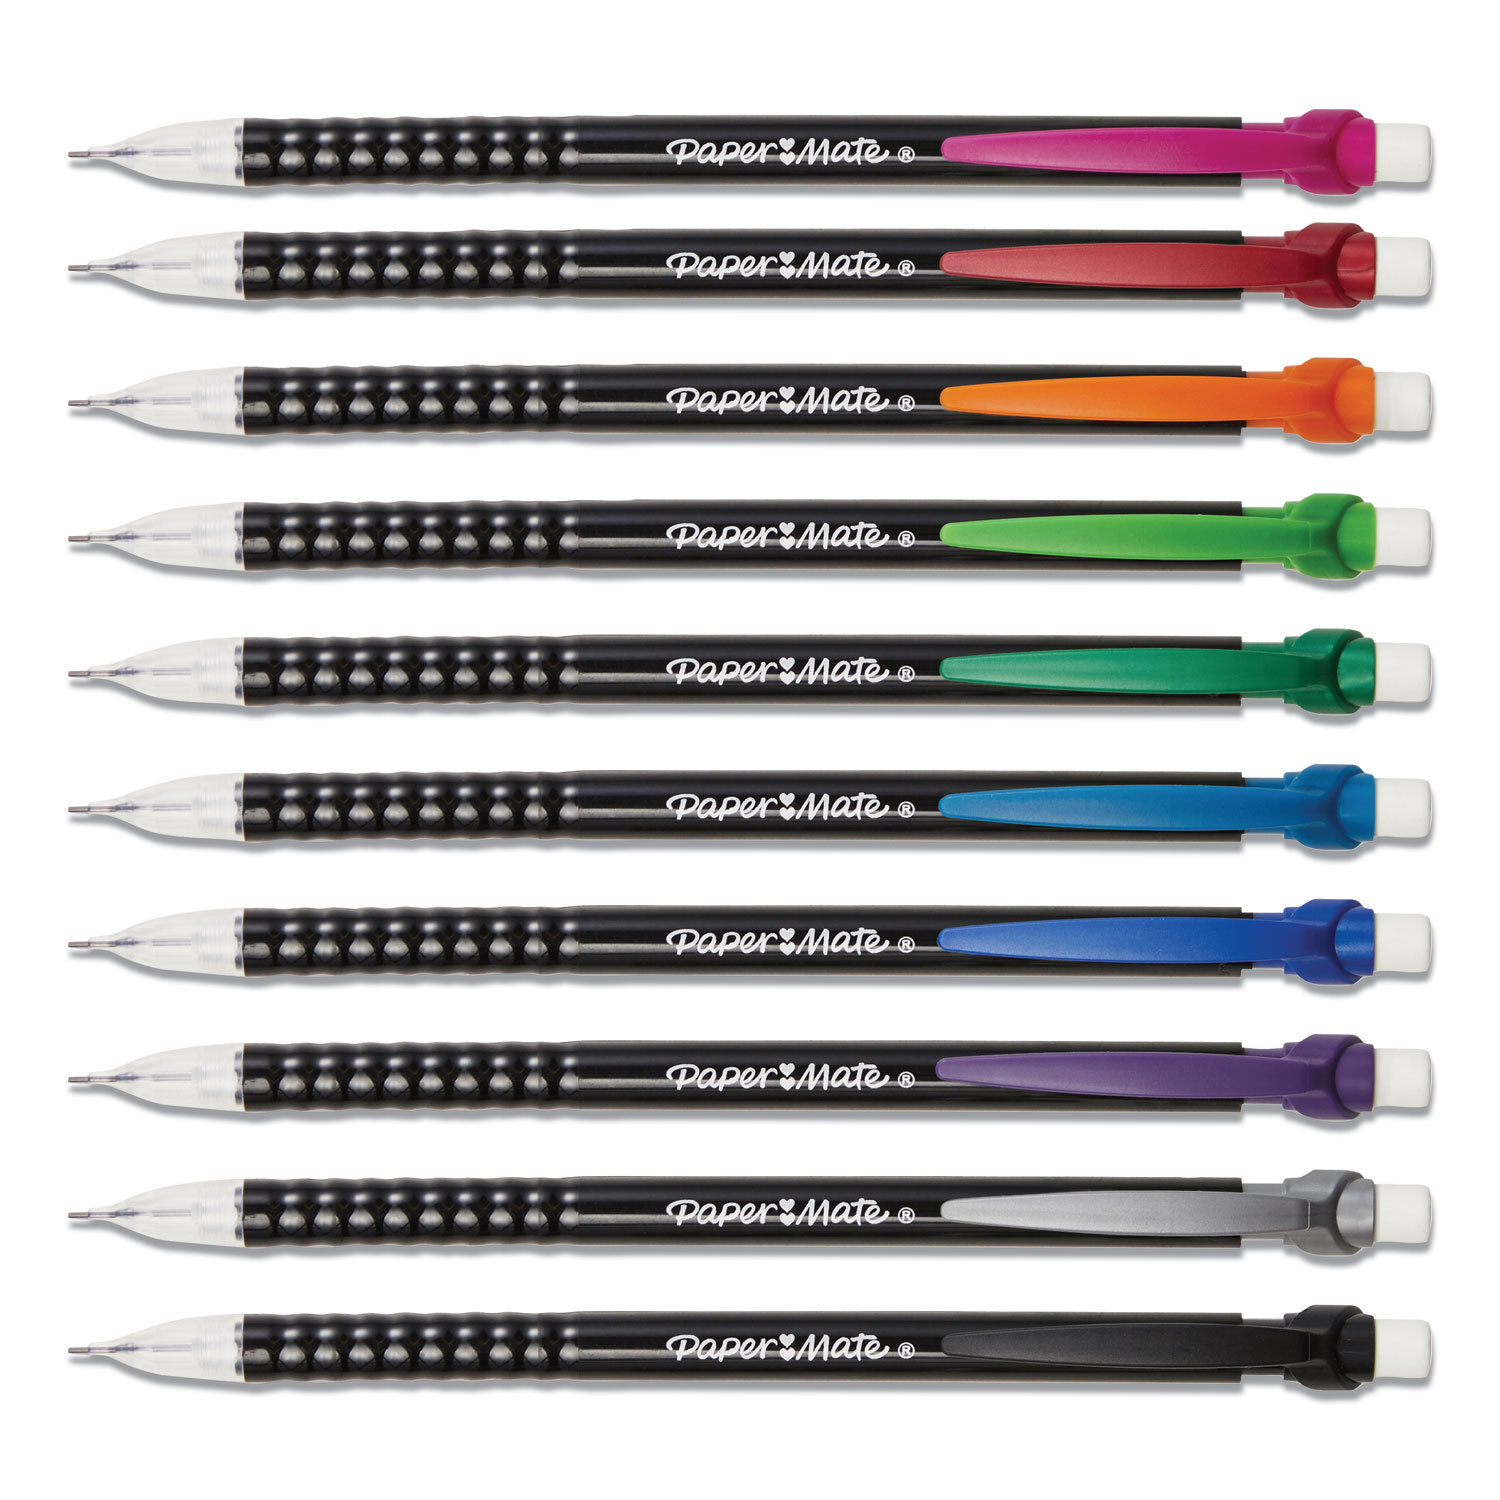  Paper Mate 2104212 Write Bros Mechanical Pencil, 0.7 mm, HB (#2), Black Lead, Black Barrel with Assorted Clip Colors, 24/Pack (PAP2104212) 